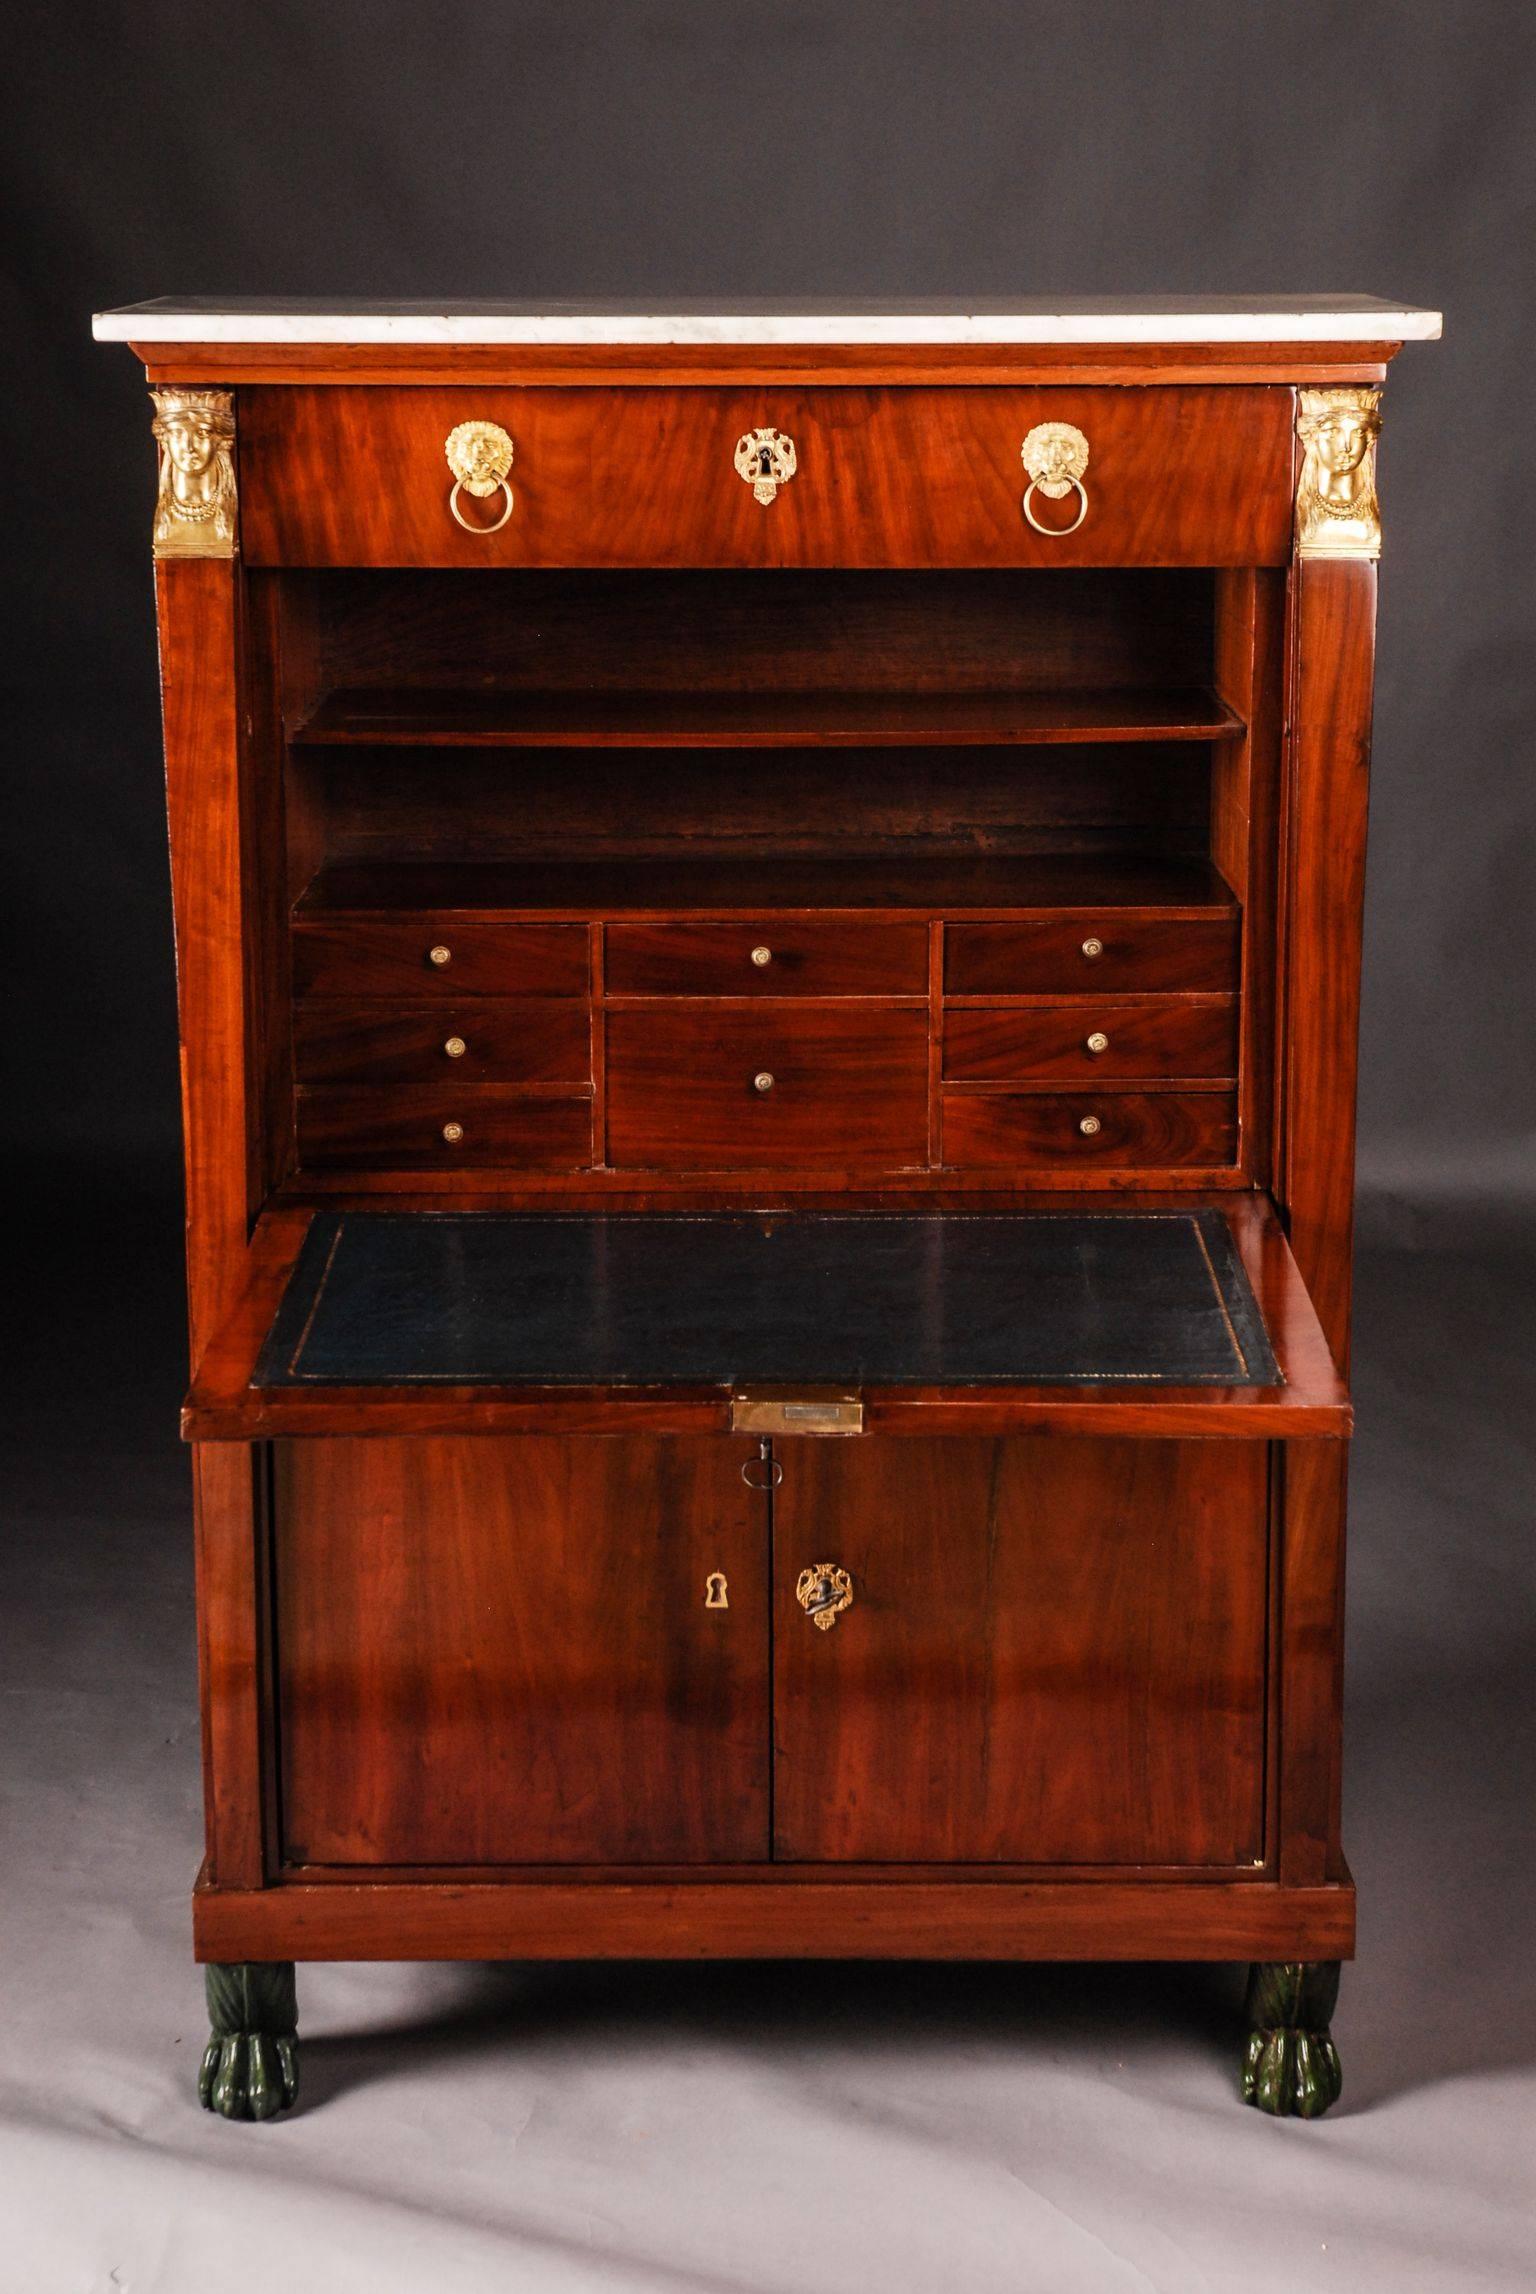 French Empire secretary 1815 from Countess of Schulenburg-Wolfsburg.
High-quality Cuba mahogany on solid oak. Fire gilded, finely chiselled fittings. Central lock with a special key. Architecturally arranged front. High-right body on green pawns.